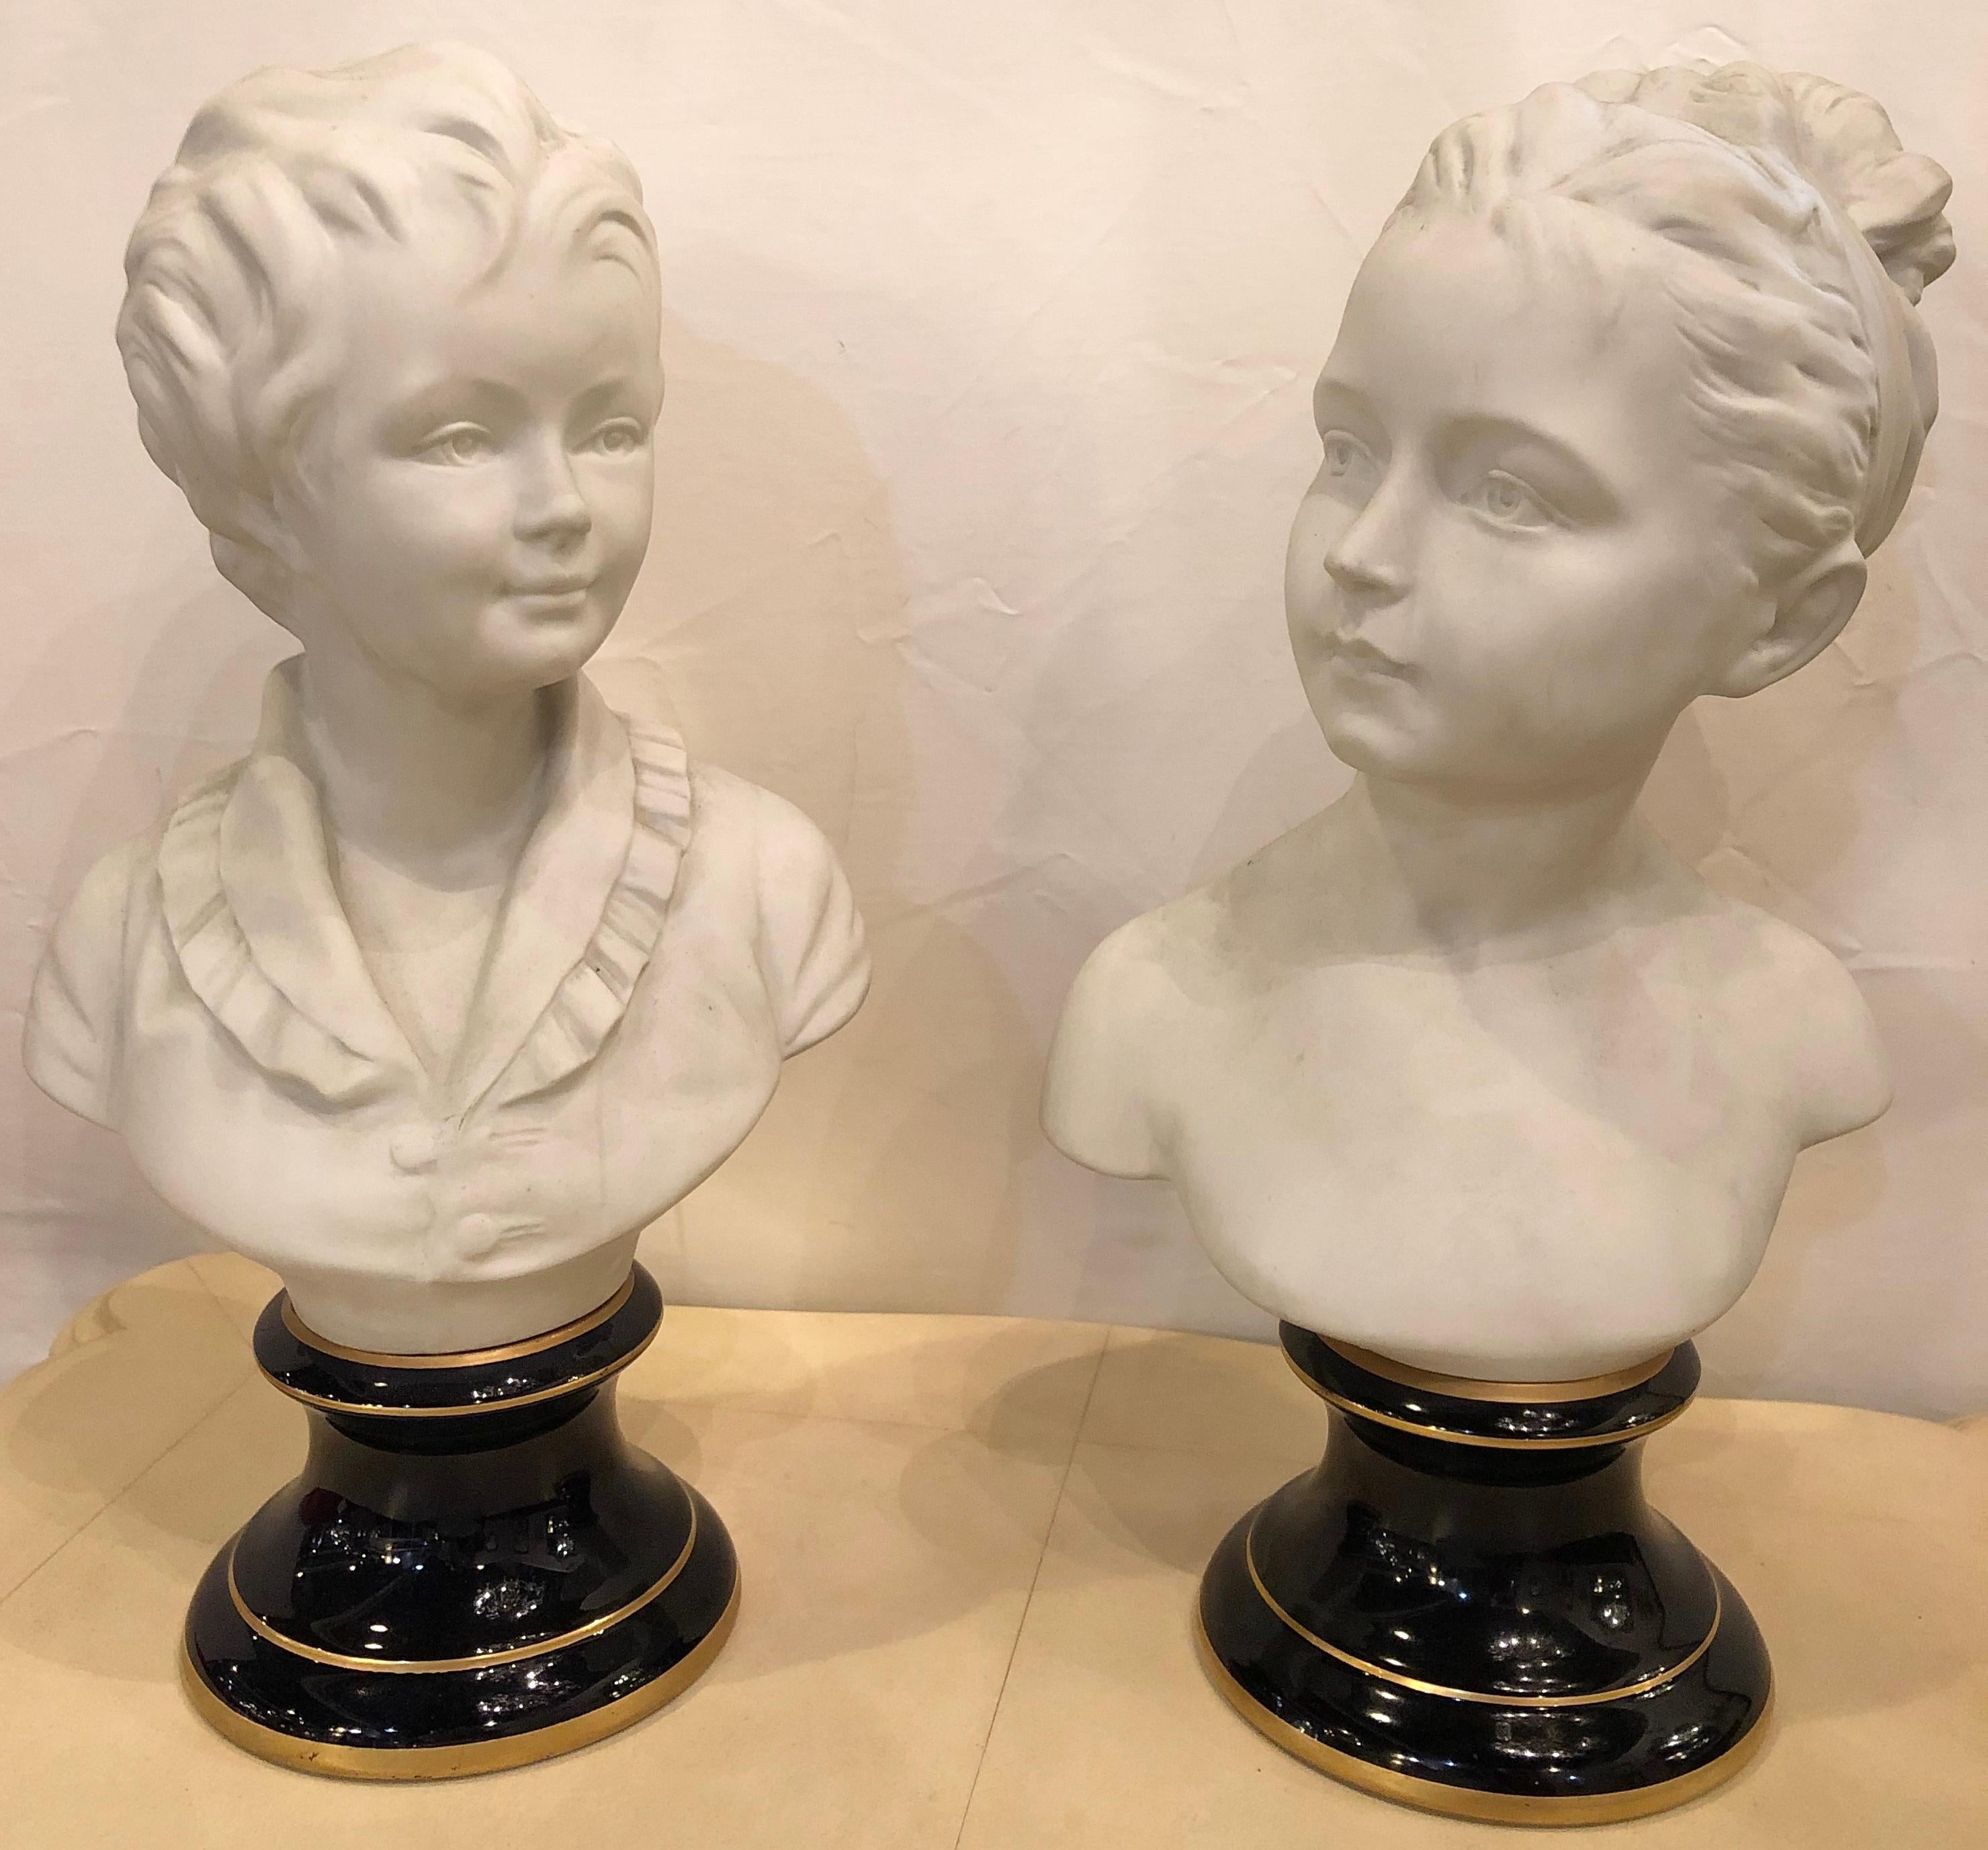 A fine pair of Limoges porcelain and Parian busts of two young children, very well detailed and standing on cobalt blue ceramic bases with a gilded ring decoration. This lovely and sweet brother sister team are Stamped Fharaud on the